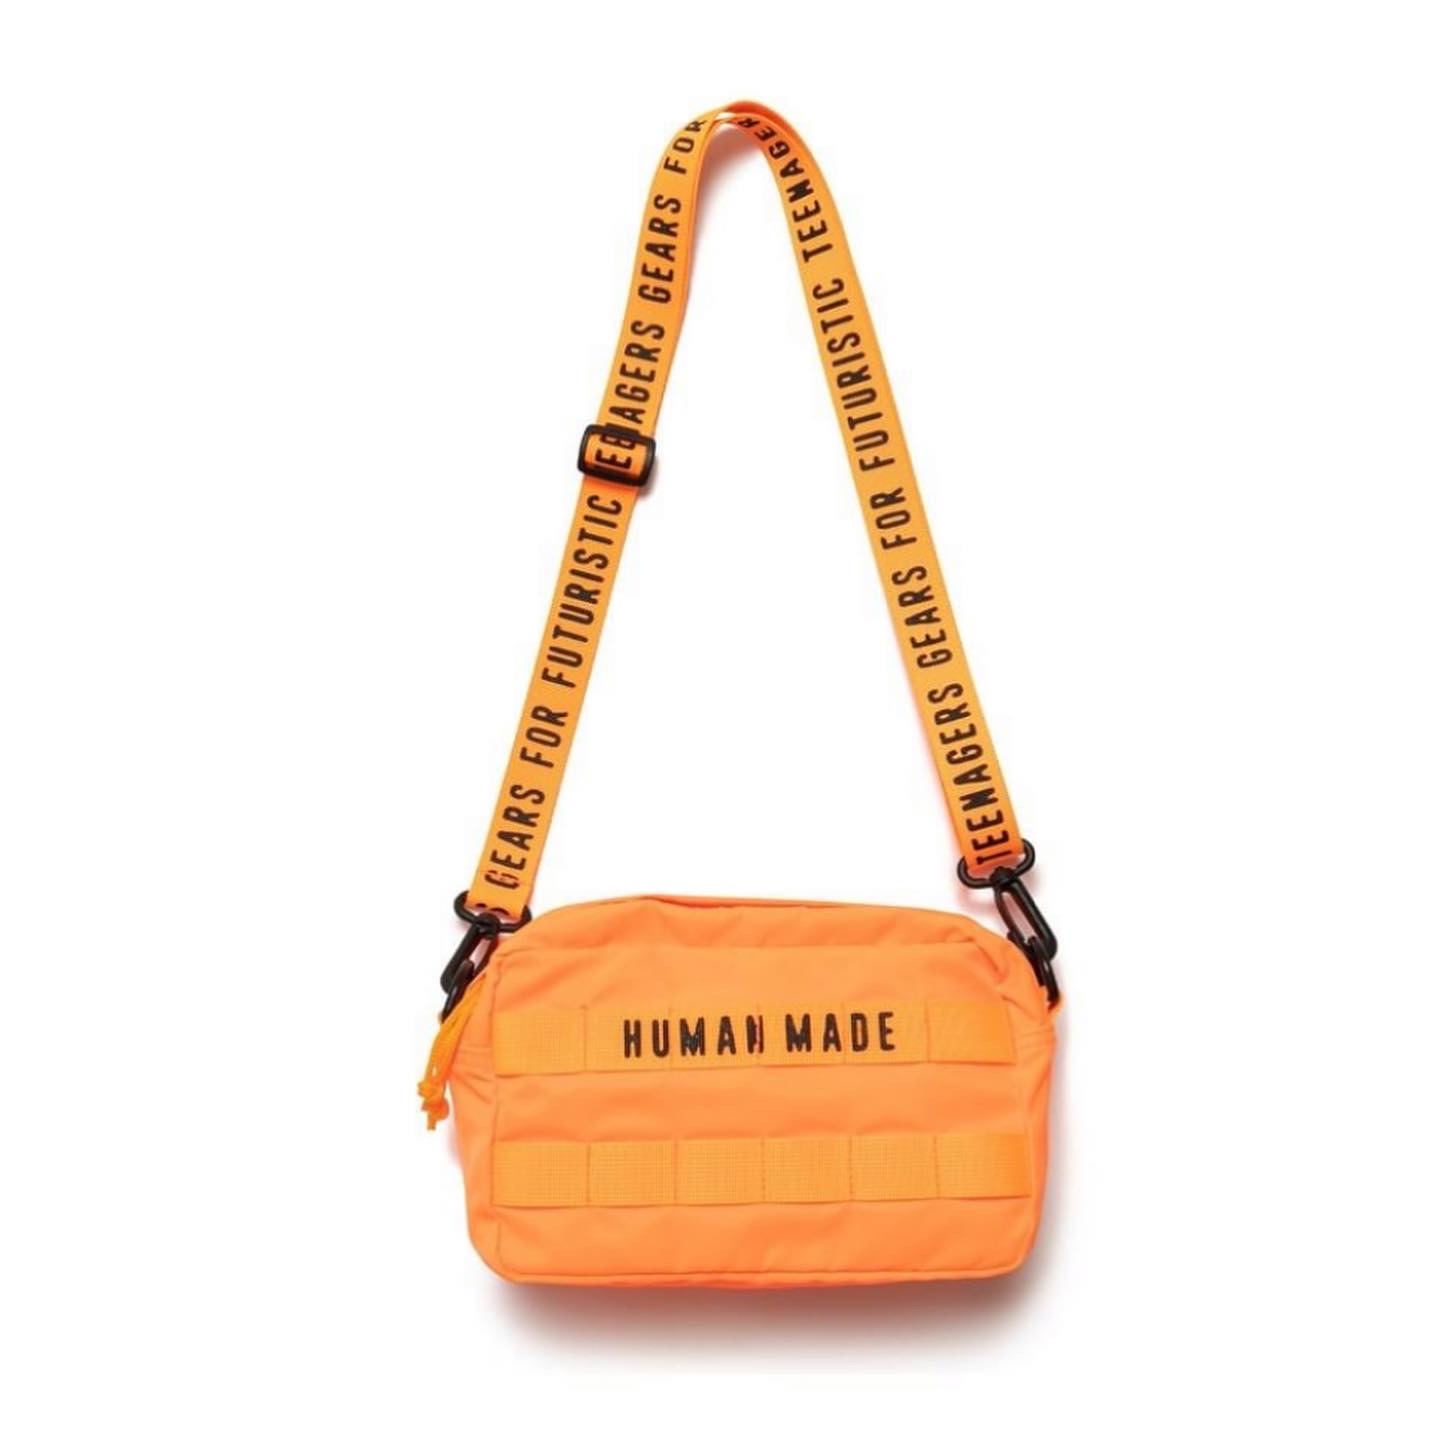 Human Made Military Pouch (Orange)